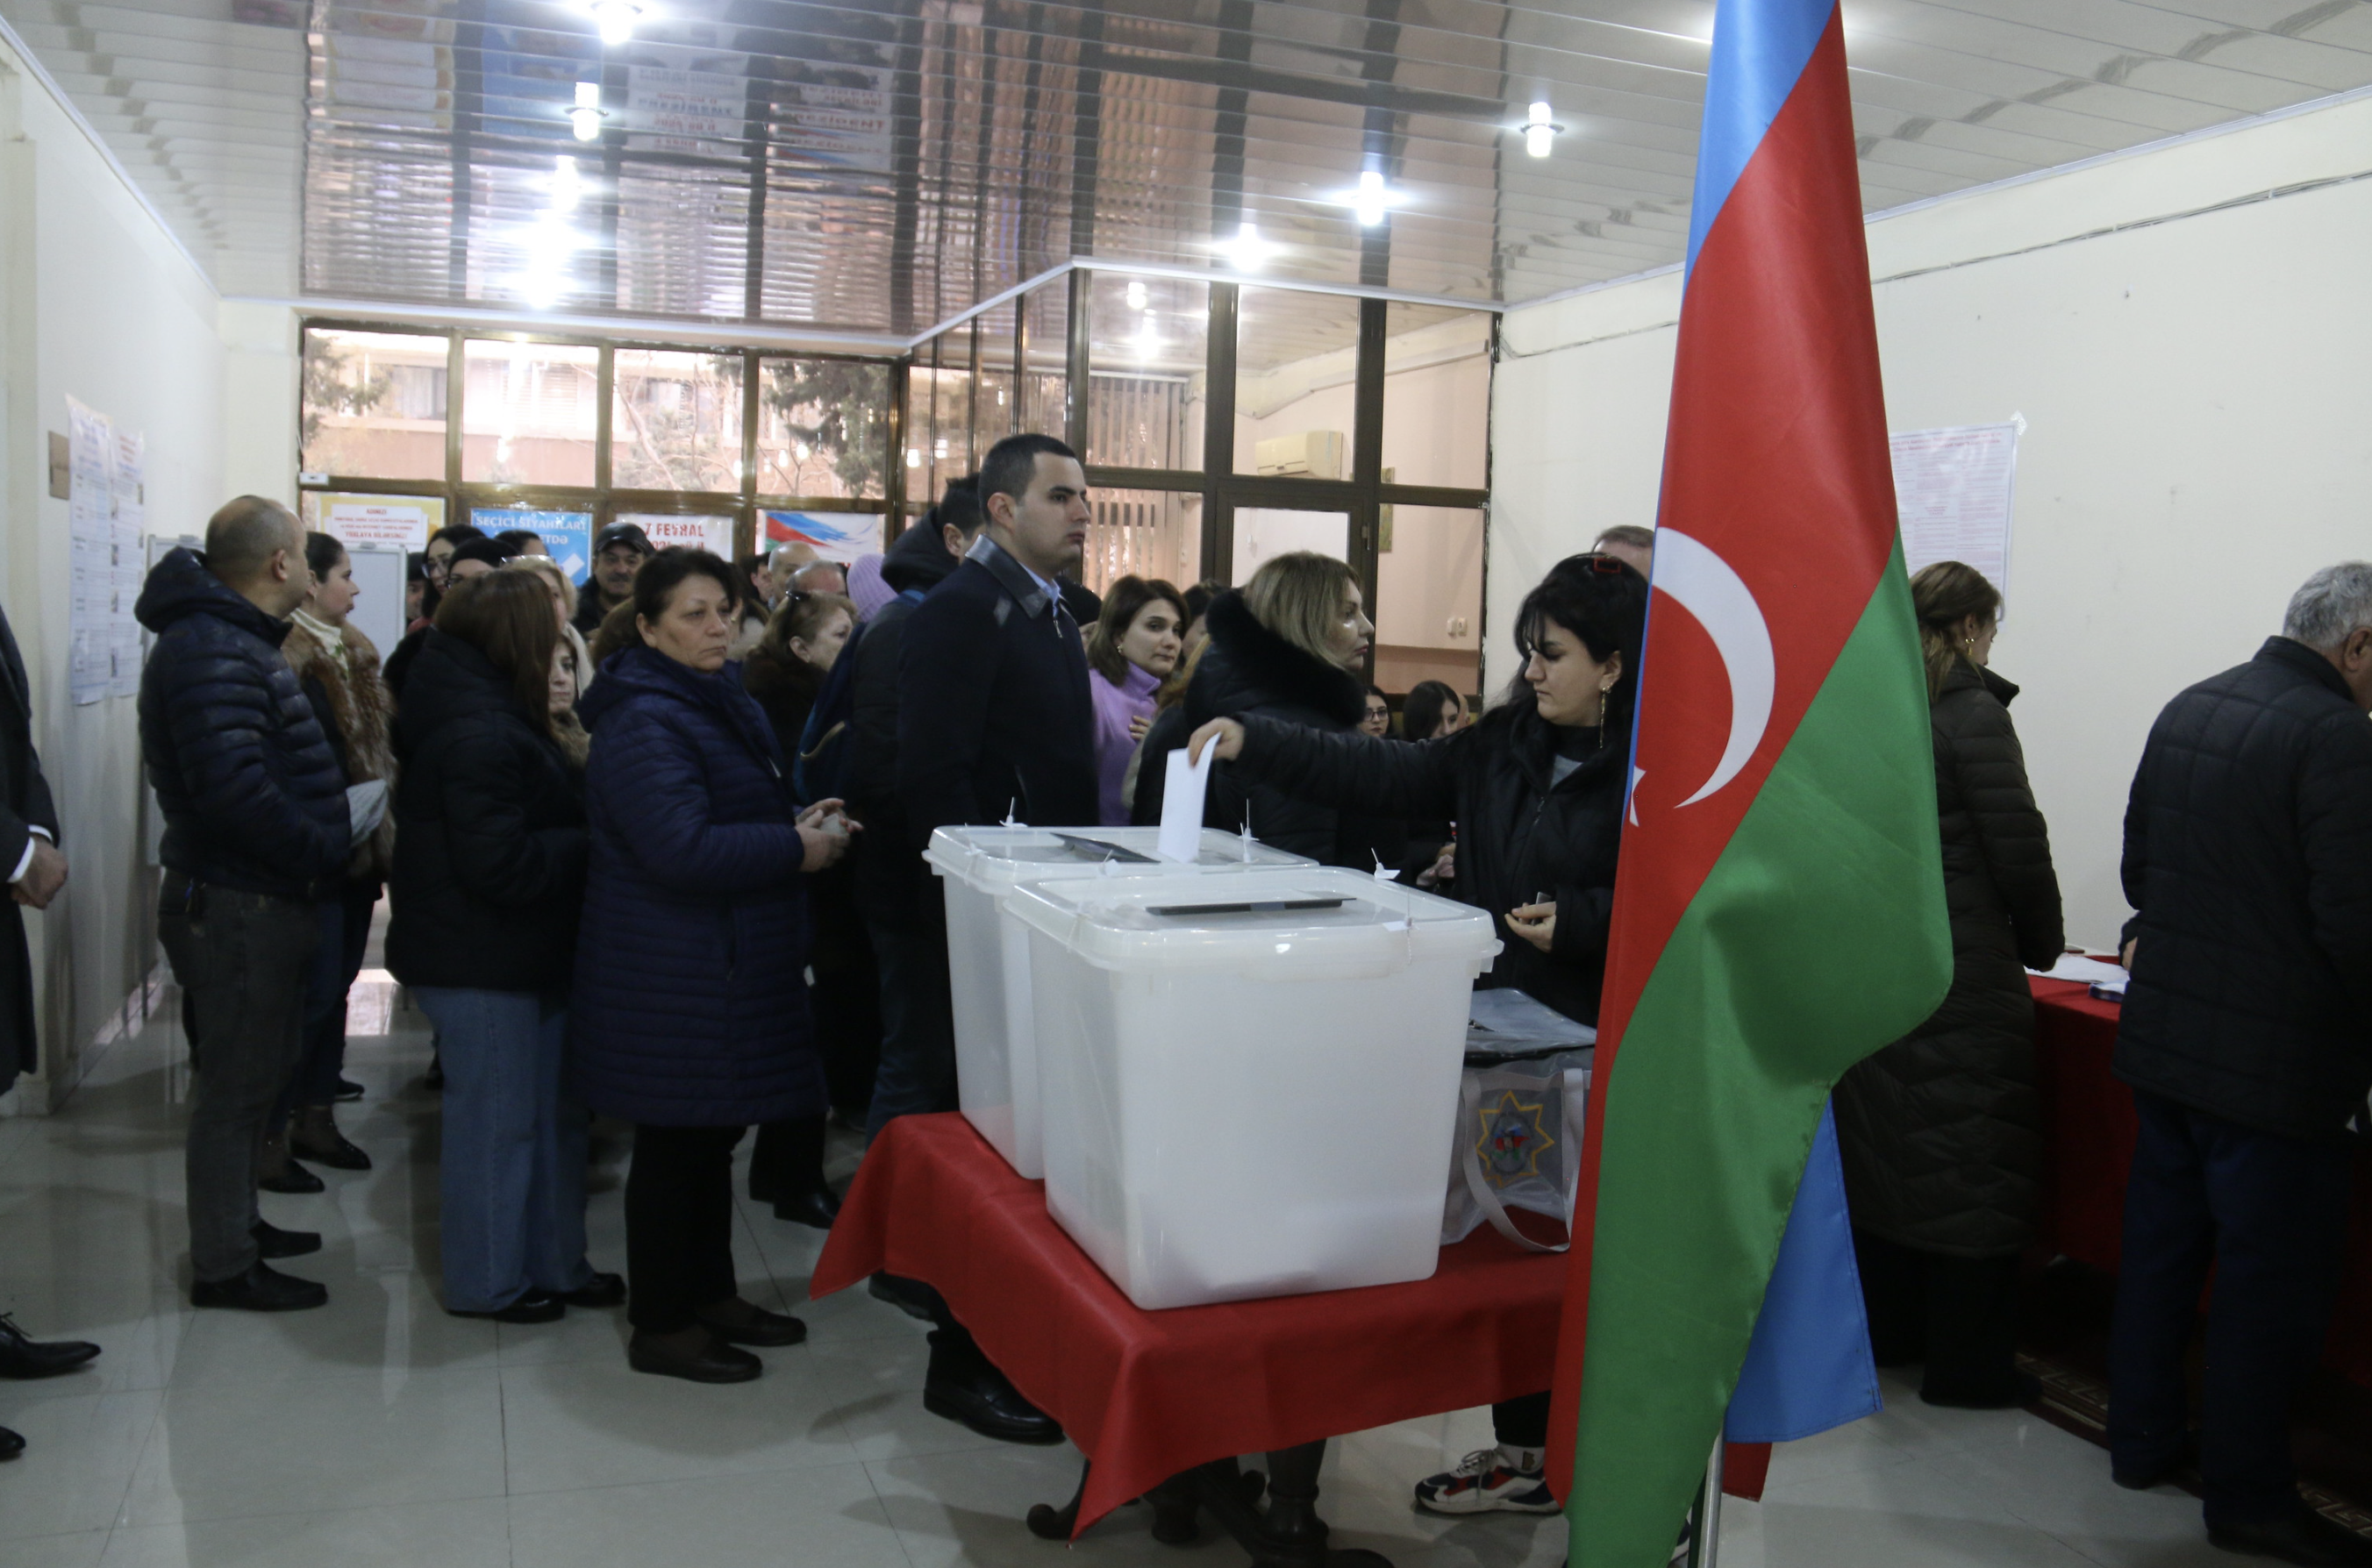 Election Observation Mission to Azerbaijan Reports ‘Gross Violations’